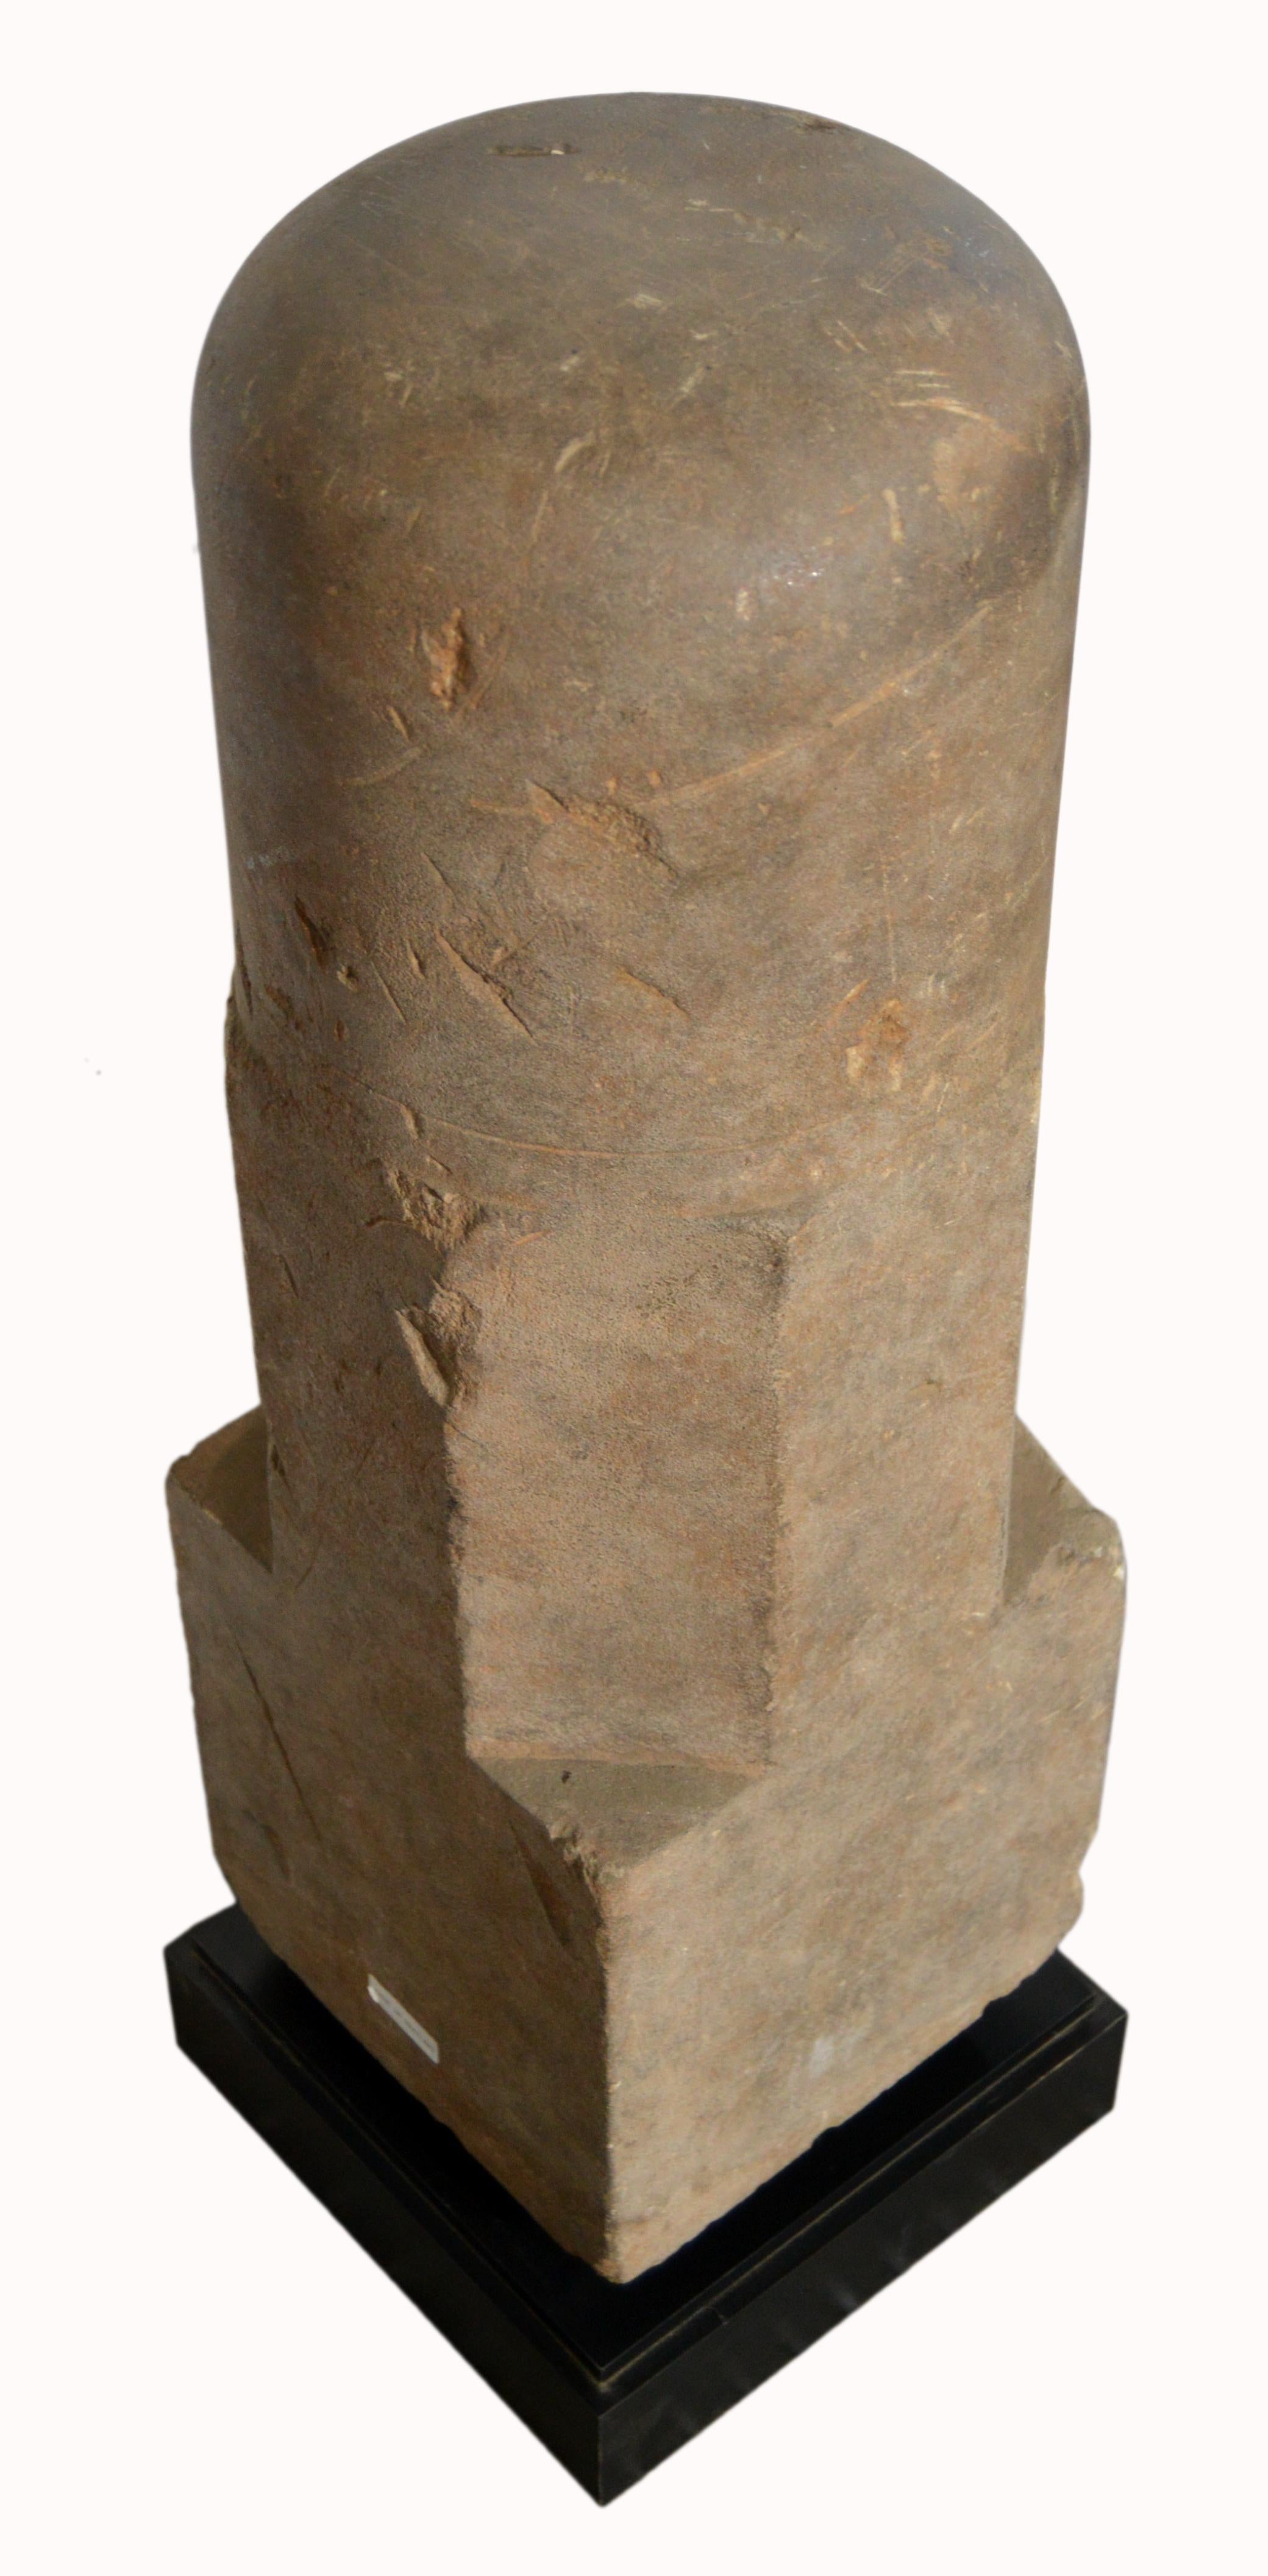 A large carved stone lingam sculpture, possibly Khmer, 13th century, Angkor period, representing the Hindu God Shiva mounted on a base. This statue is made of a square section in its lower part below an octagonal middle and a curved circular top.